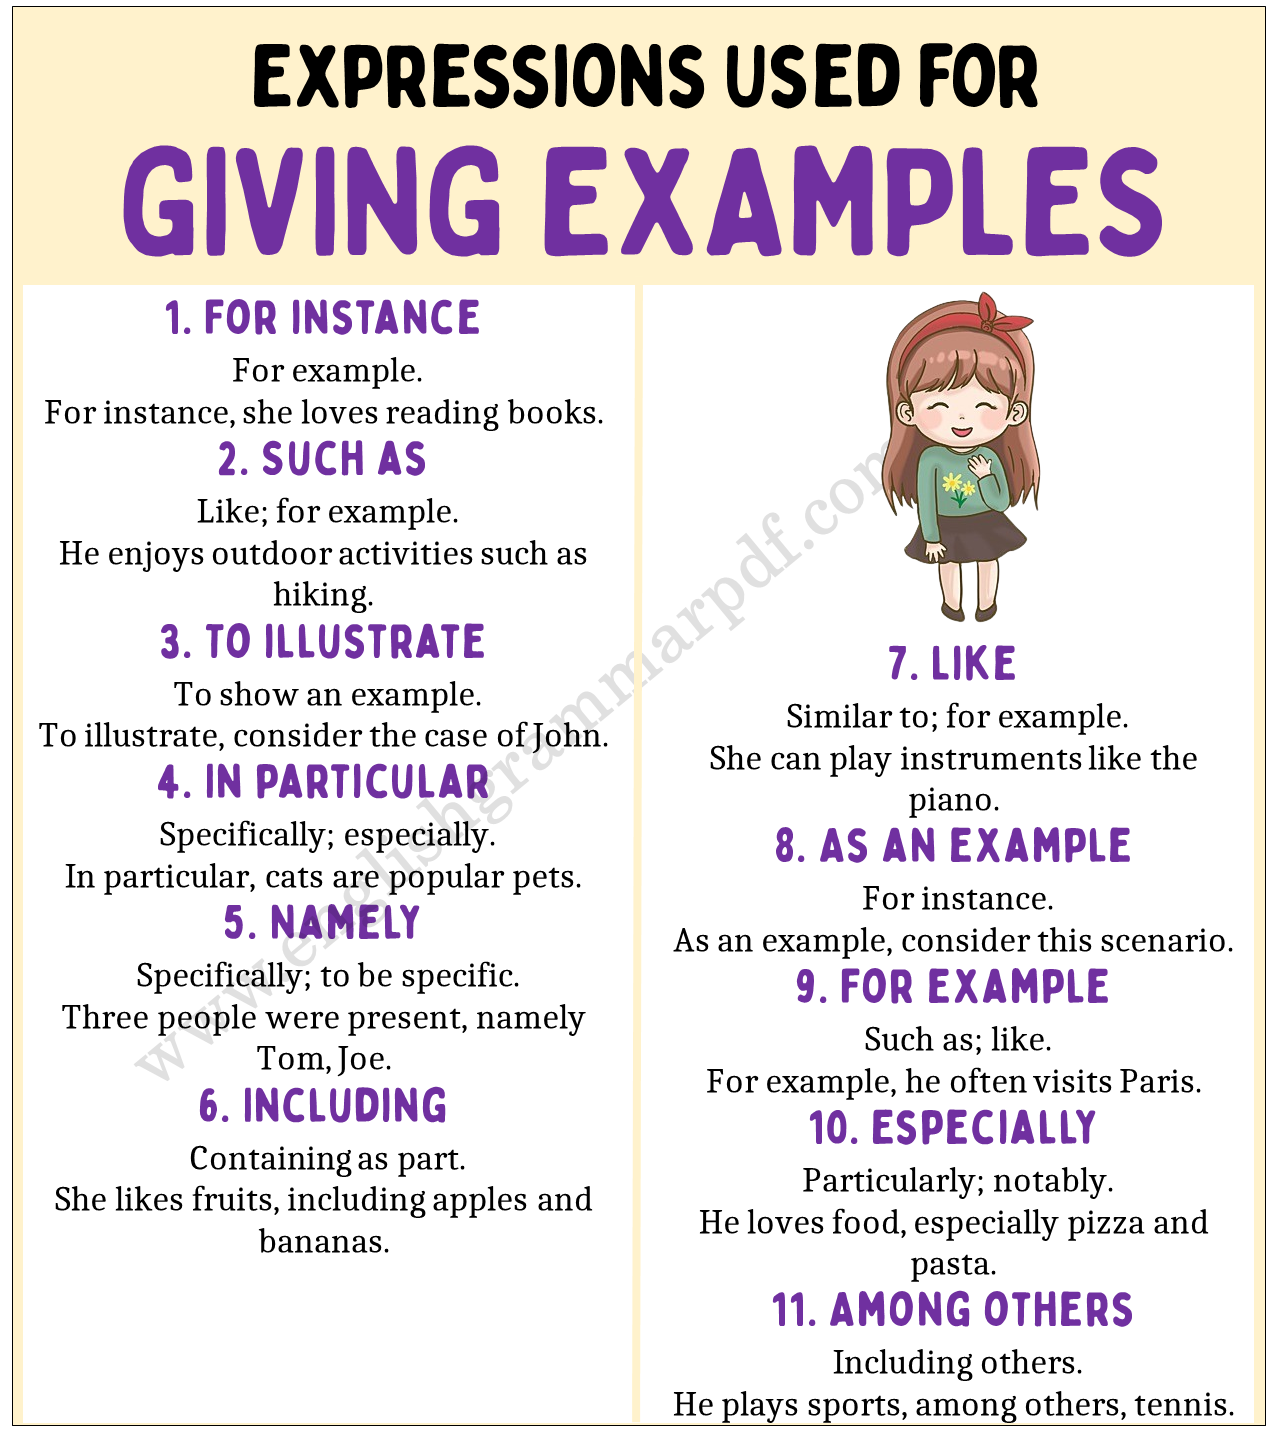 Expressions to Use for Giving Examples